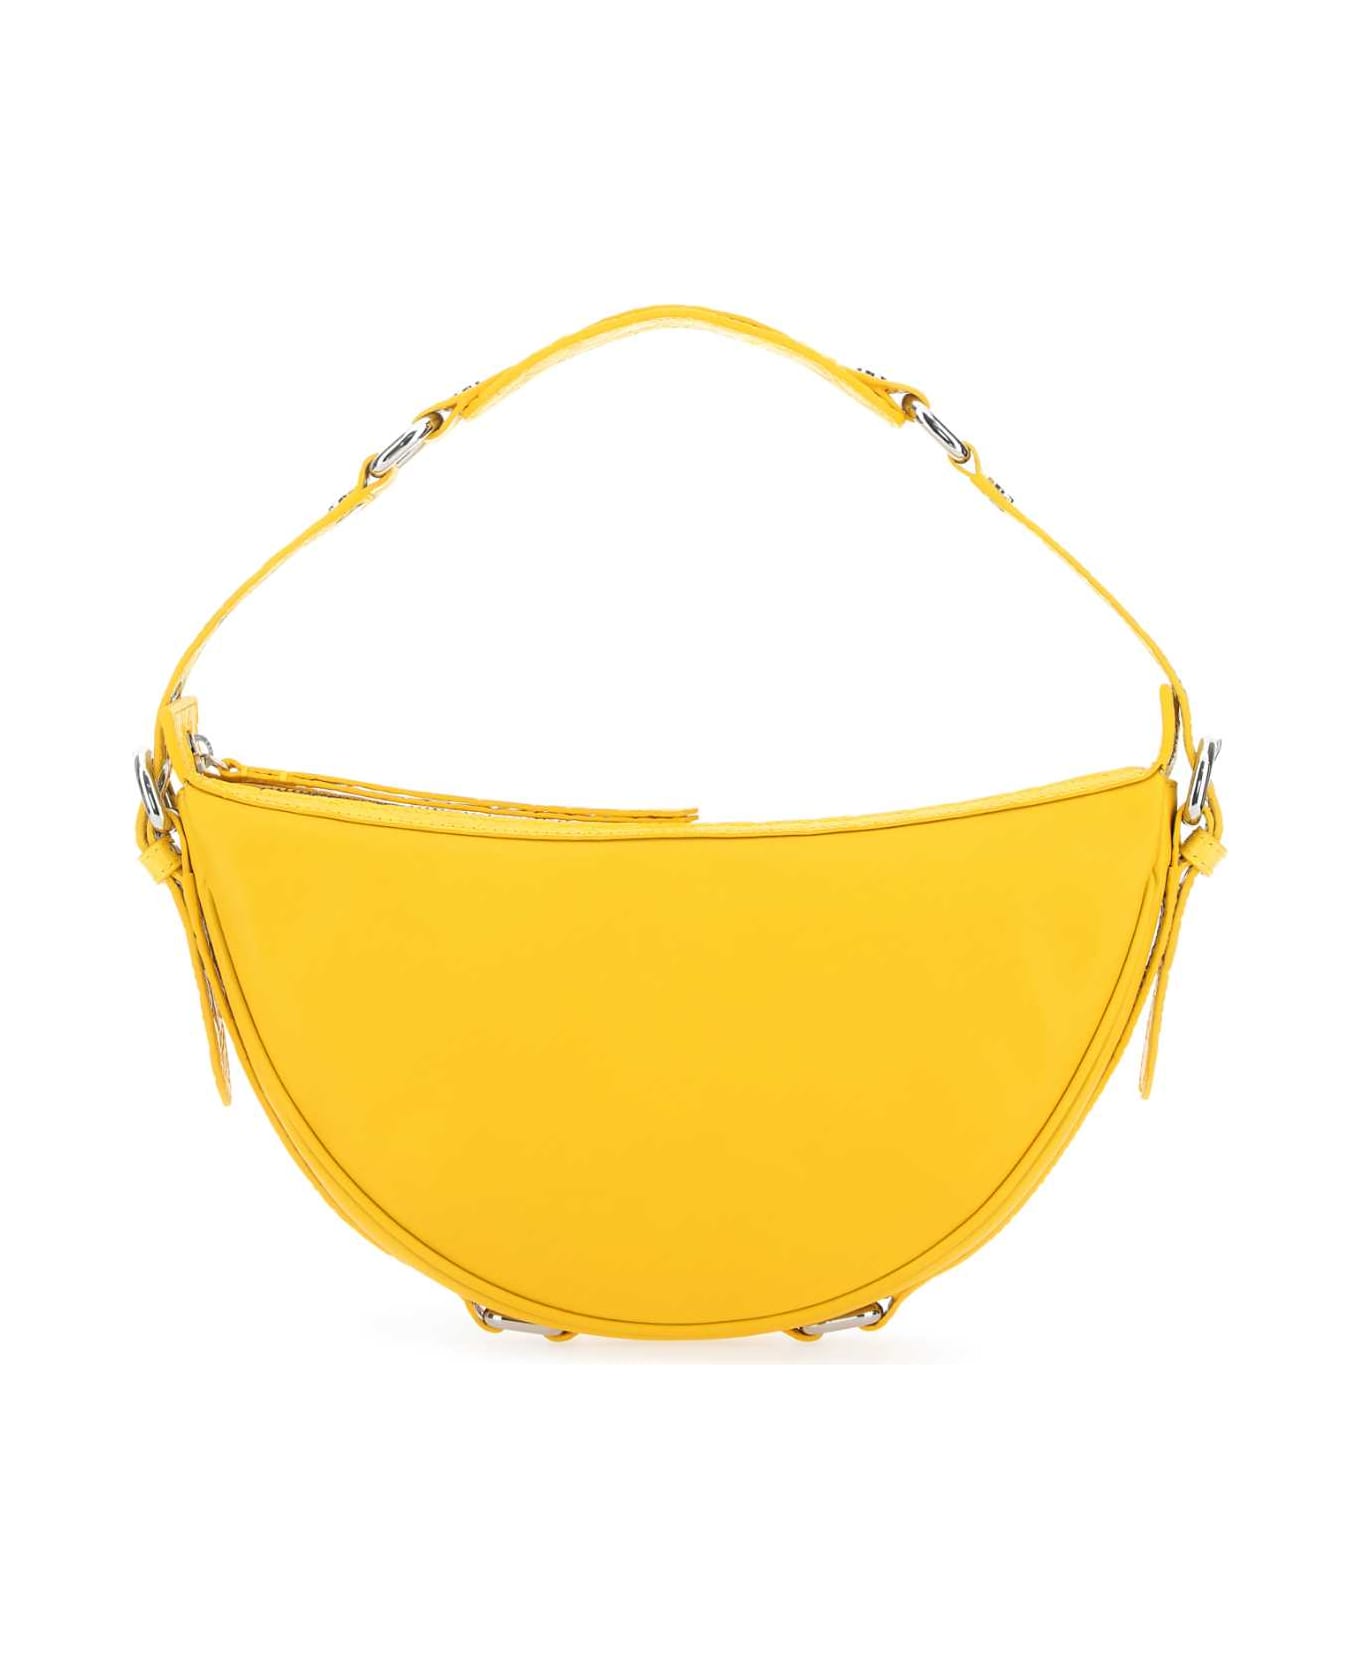 BY FAR Yellow Leather Gib Shoulder Bag - Yellow